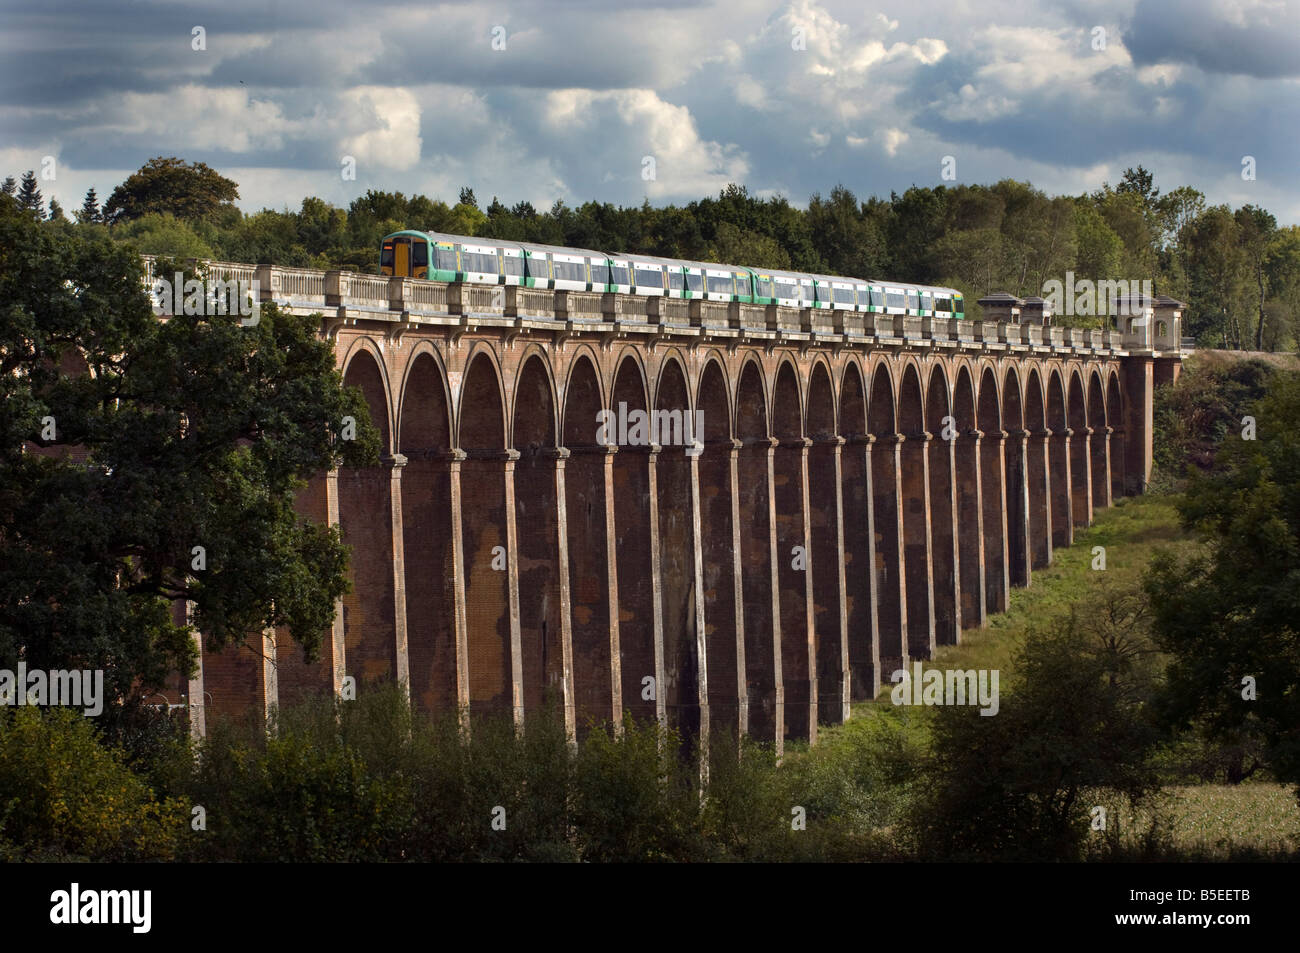 A Southern Rail commuter express train crosses the Ouse Valley Viaduct Balcombe on the London-Brighton railway line Stock Photo